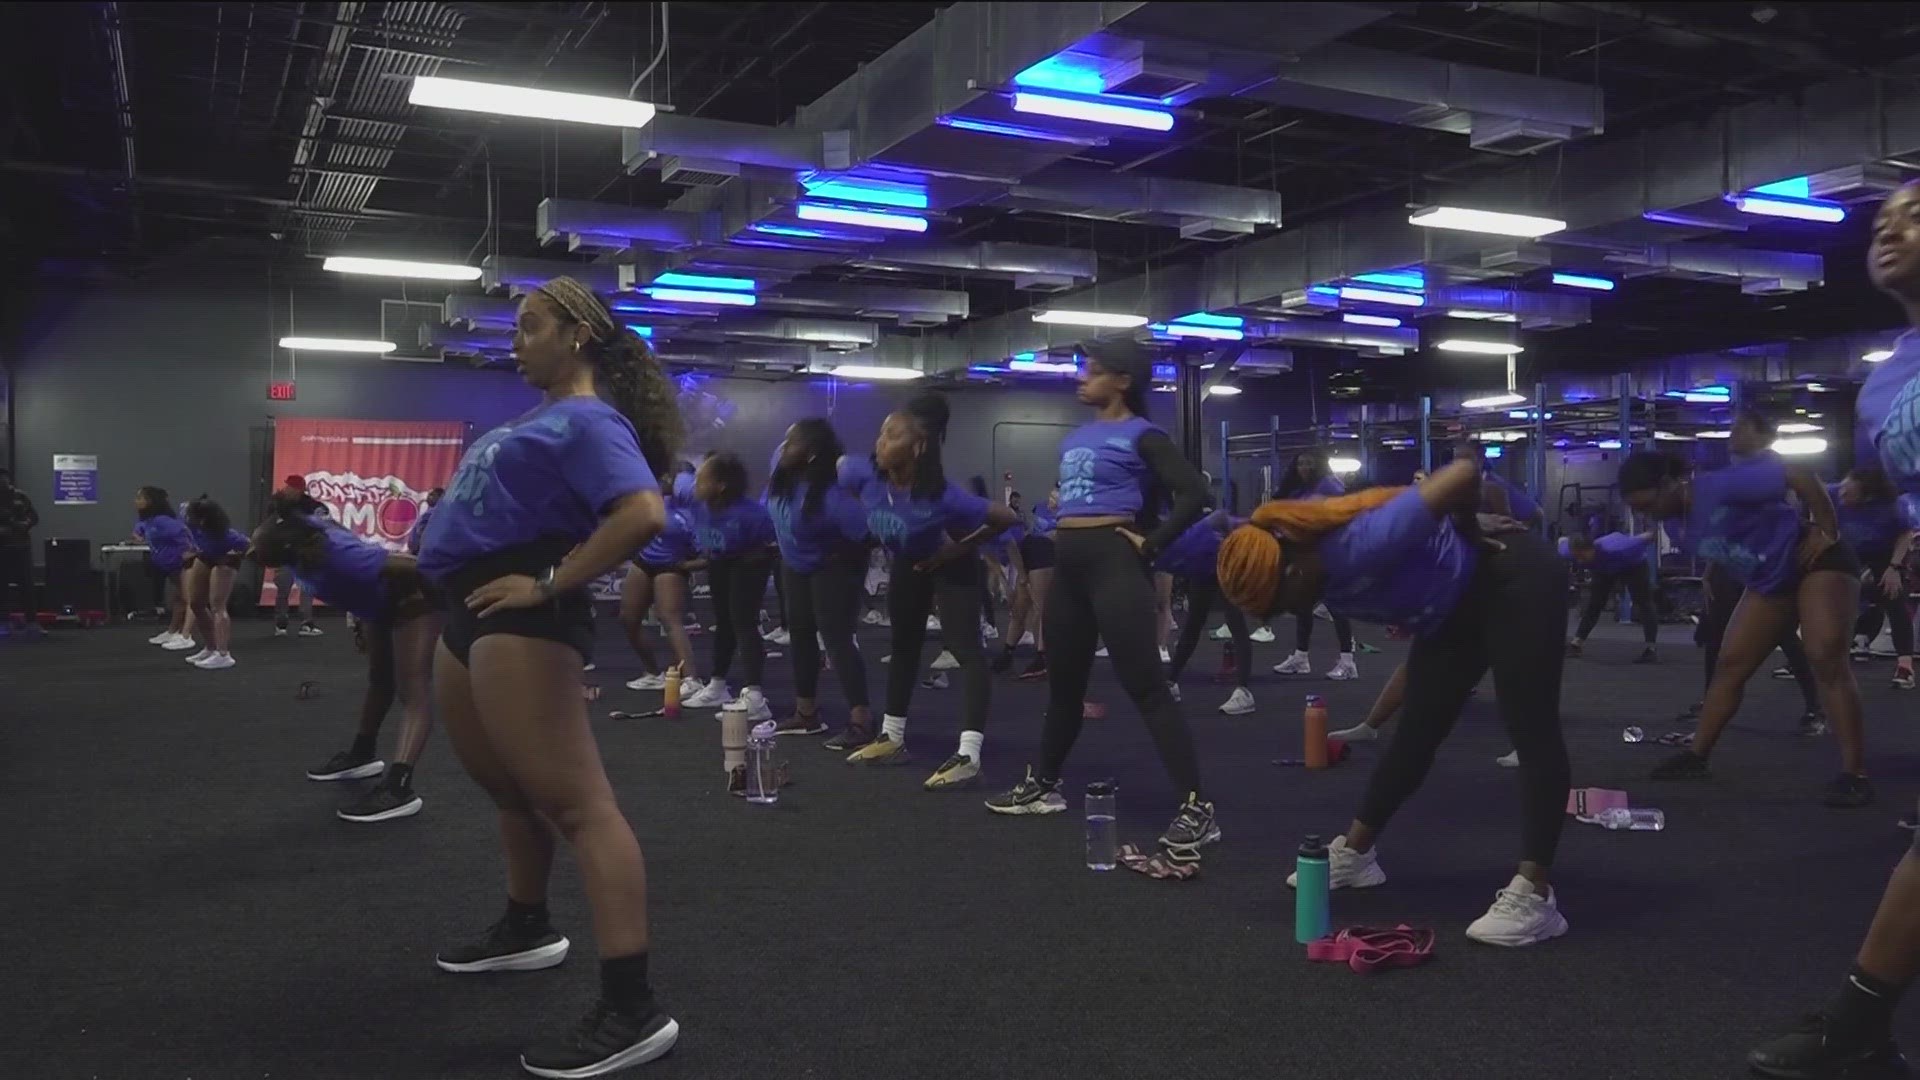 The free workout was focused on empowering college-age women while helping them to live healthy lifestyles.